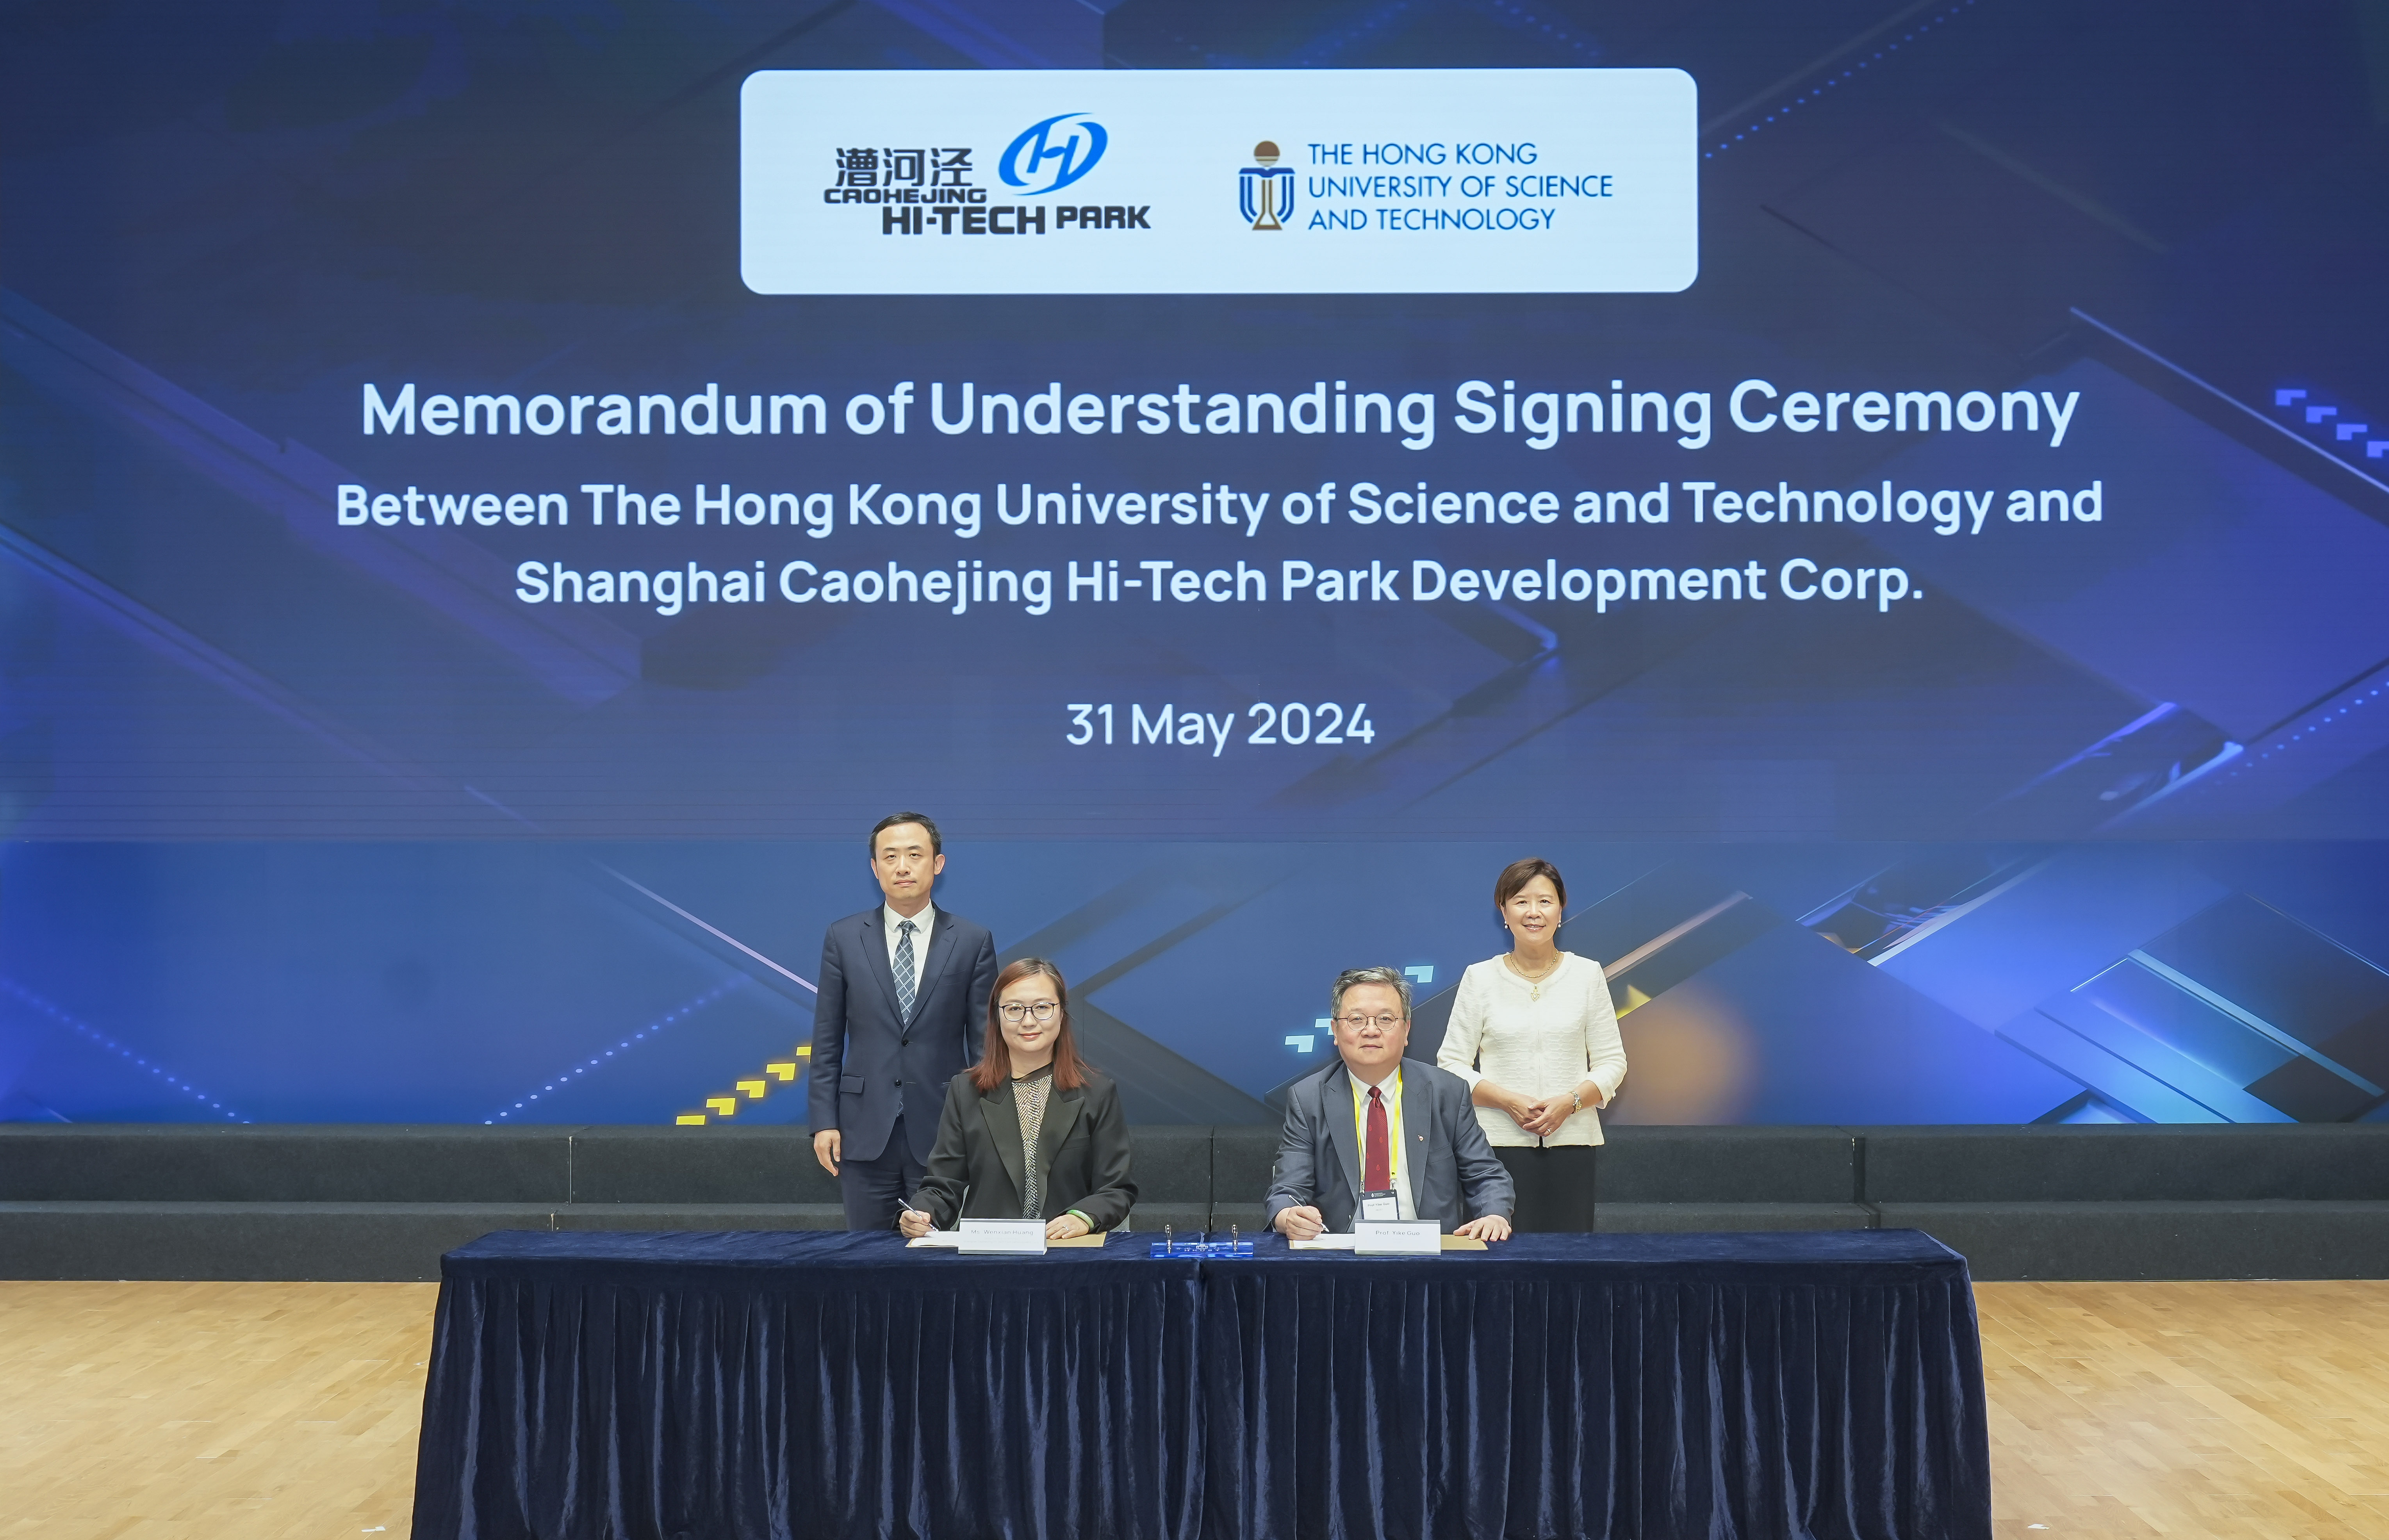 MoU signing ceremony between HKUST and Shanghai Caohejing Hi-Tech Park Development Corp. 